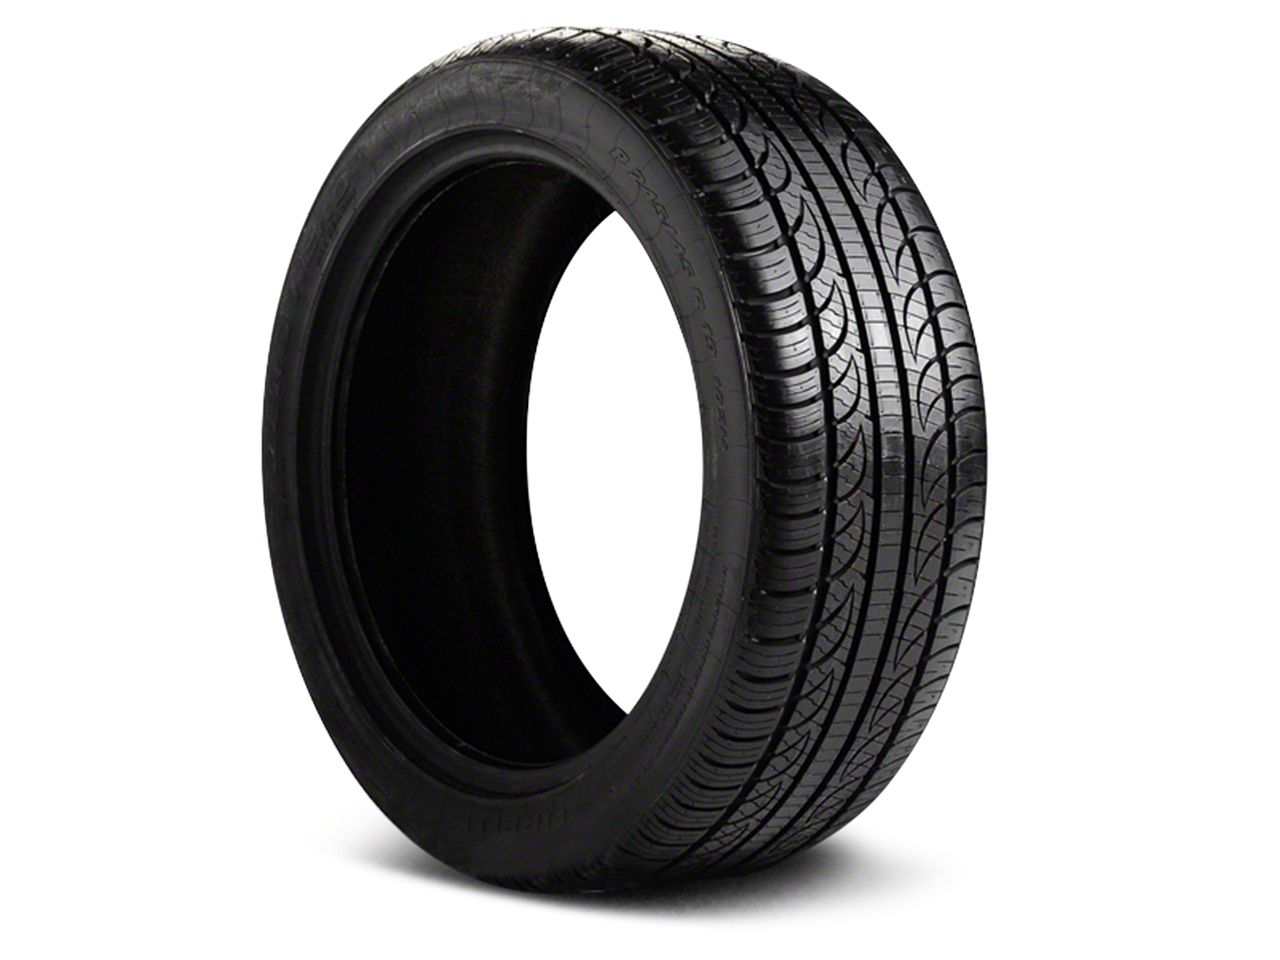 Mustang All Season Ford Tires 2010-2014